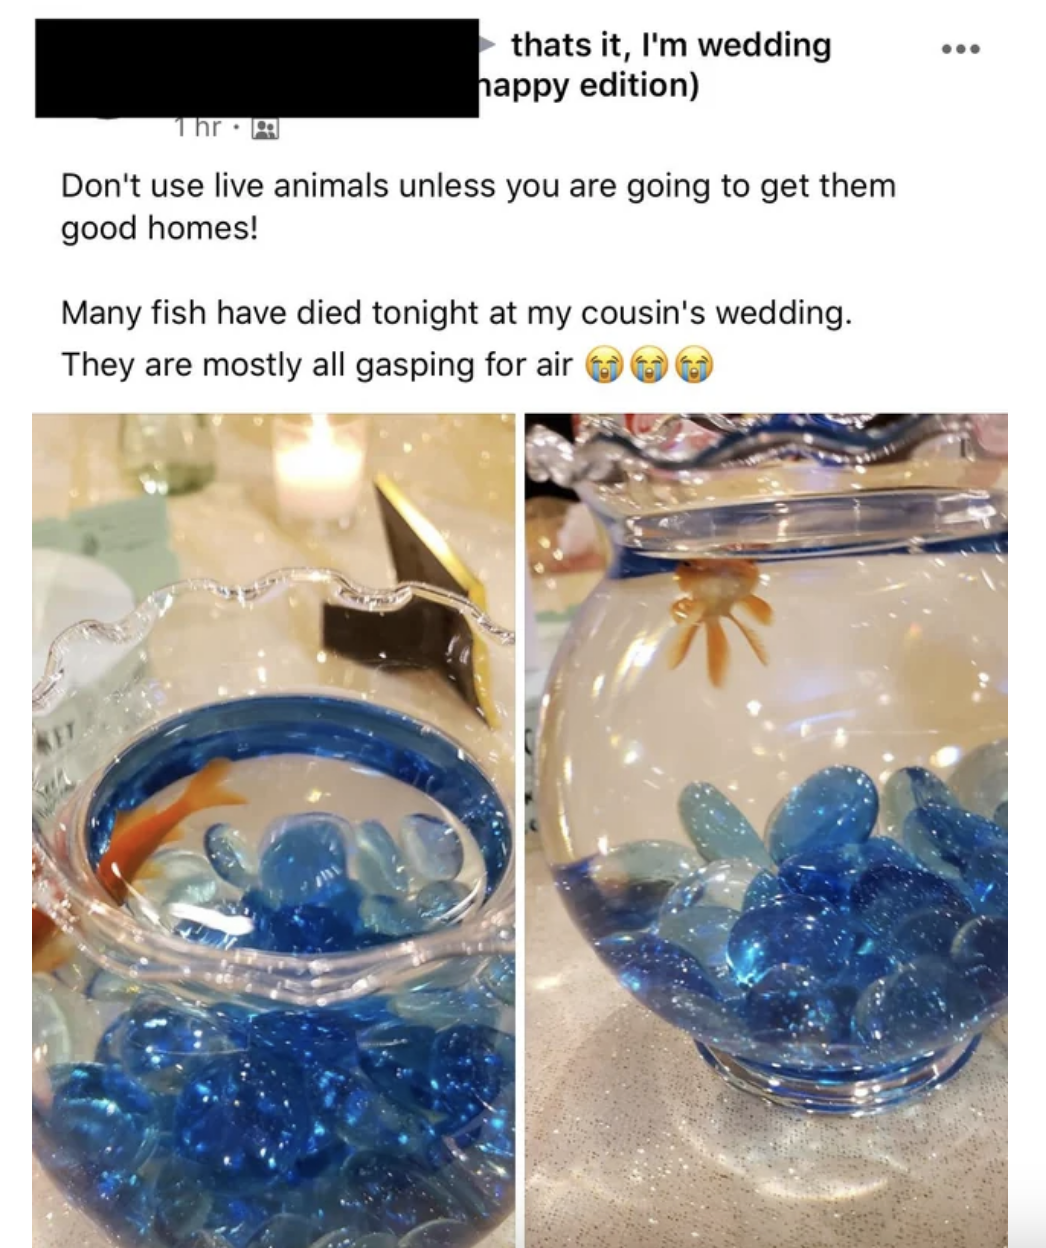 The reception centerpieces include glass bowls with live goldfish in them, and a guest says several fish have died